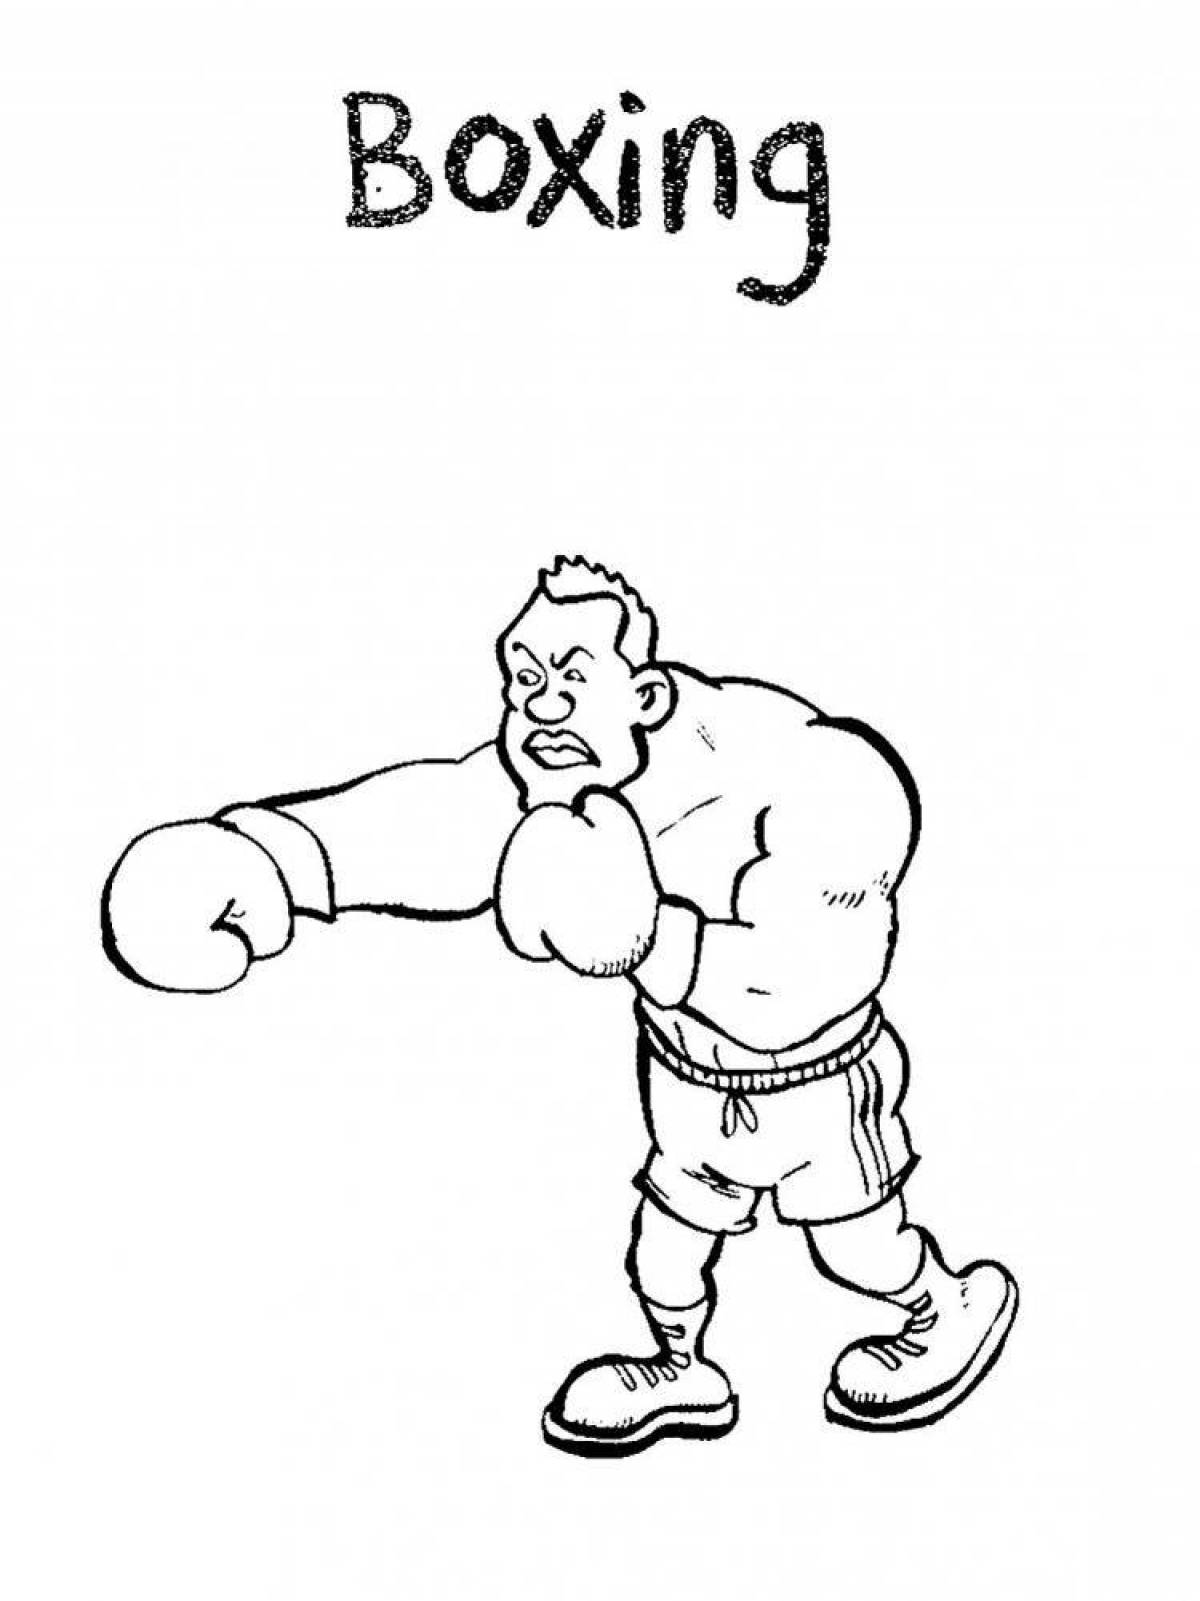 Chipper boxer coloring book